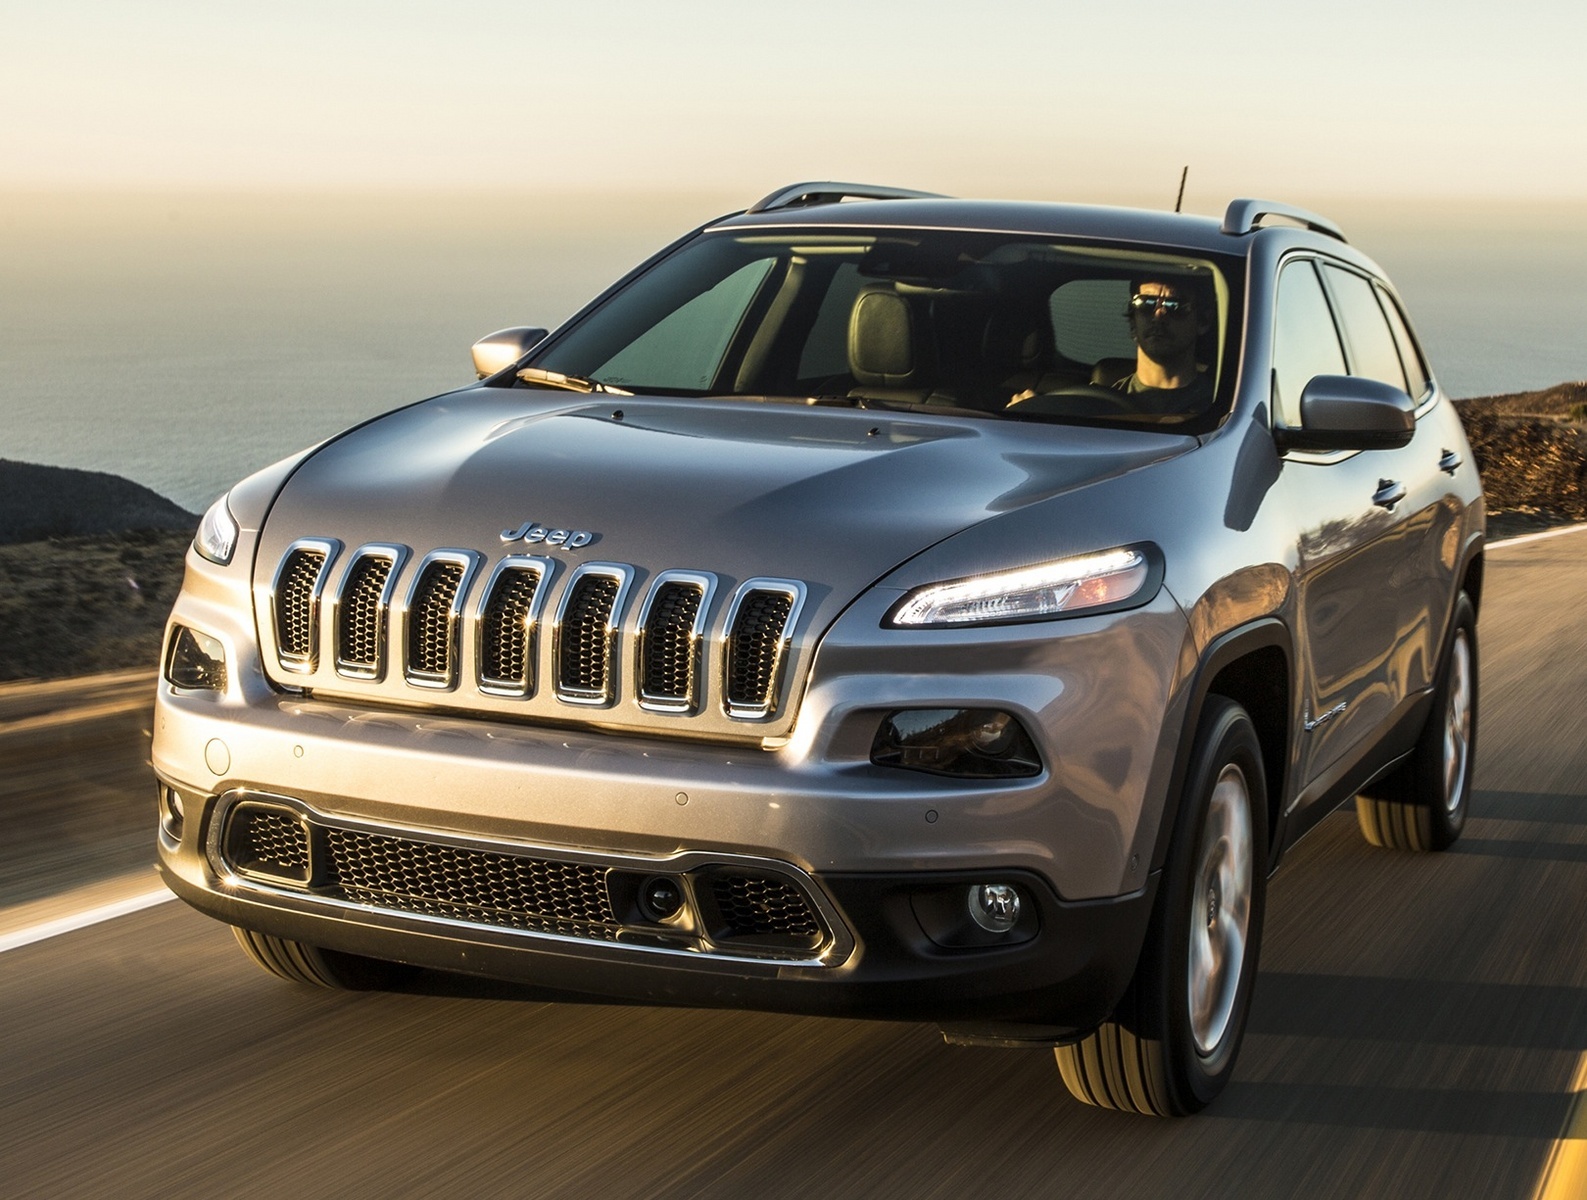 Jeep hackers return, able to take control of steering and brakes